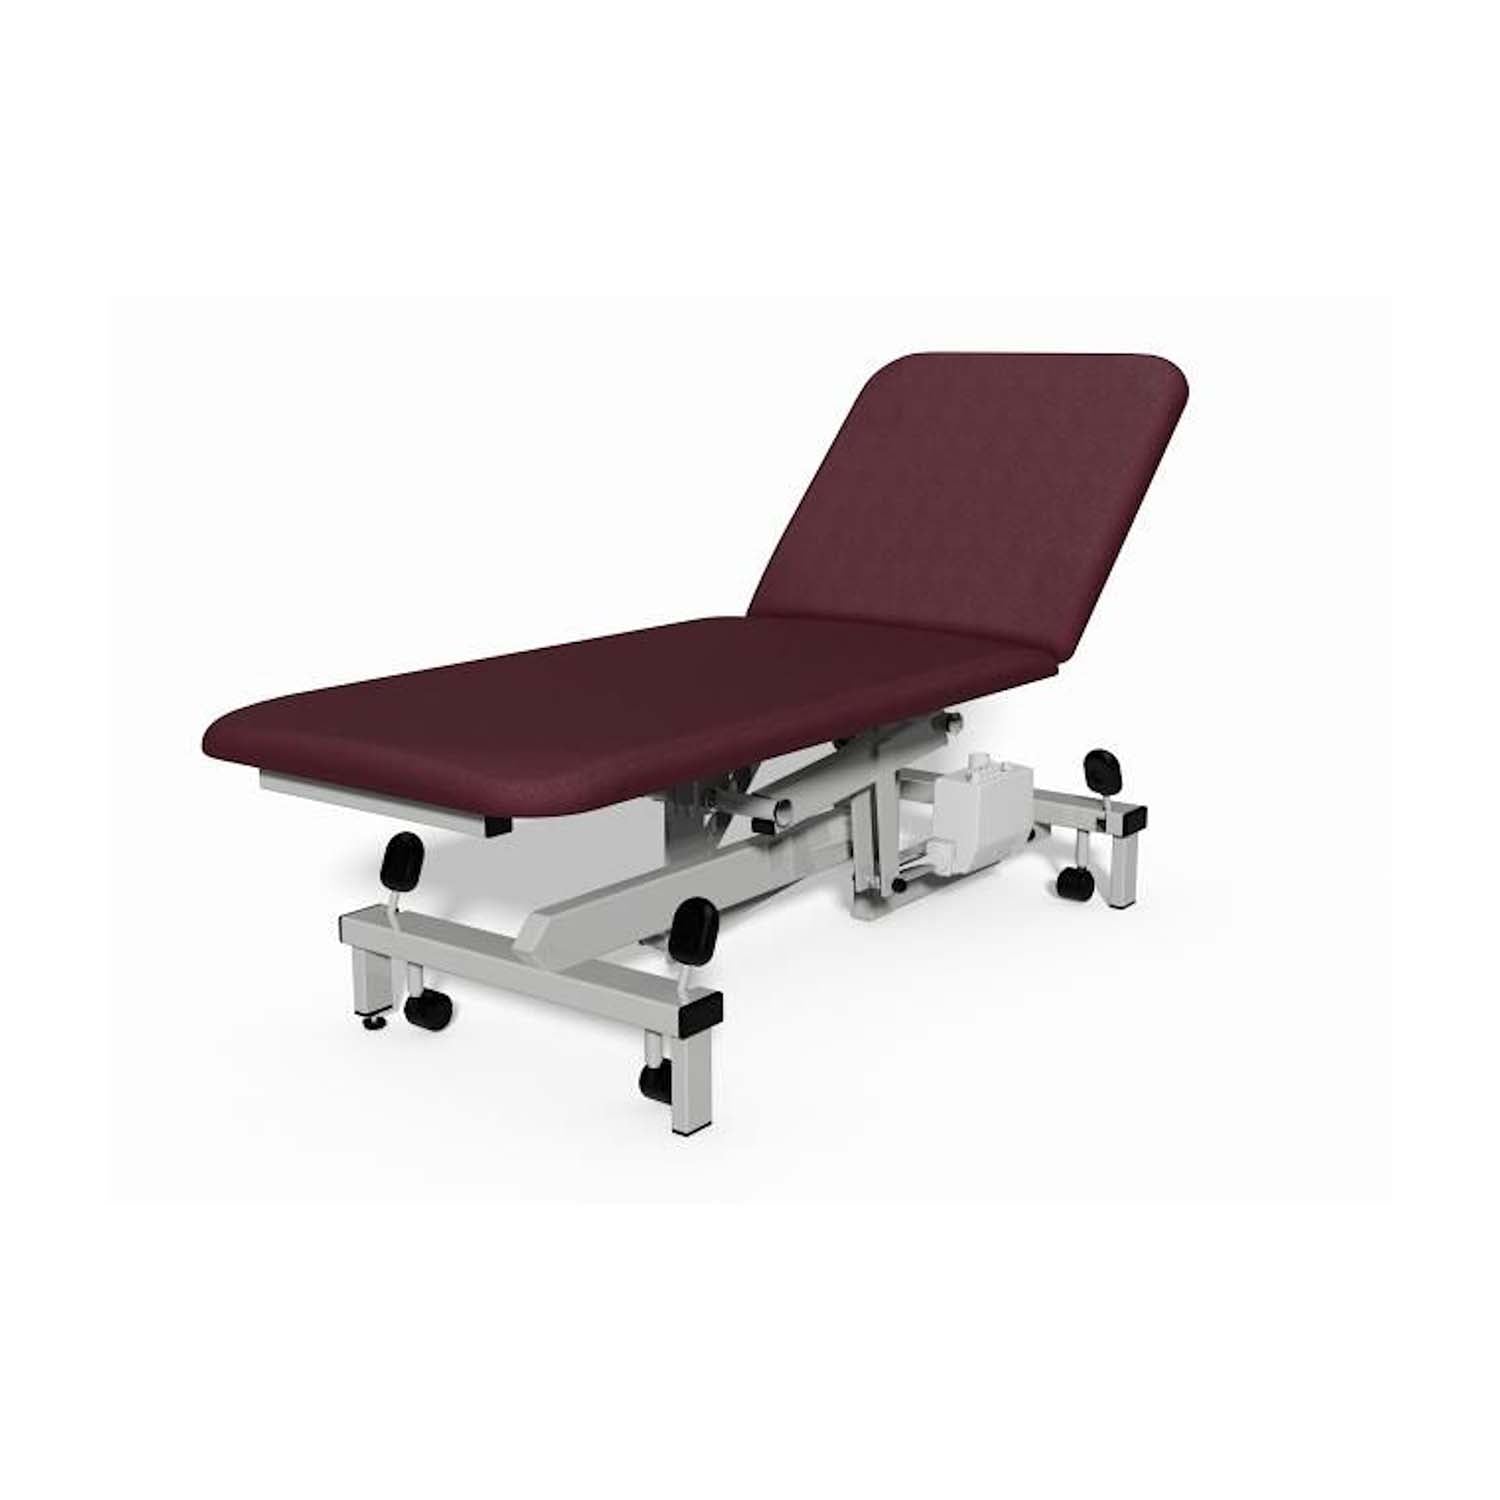 Plinth 2000 Model 502 Examination Couch | Hydraulic | Mulled Wine